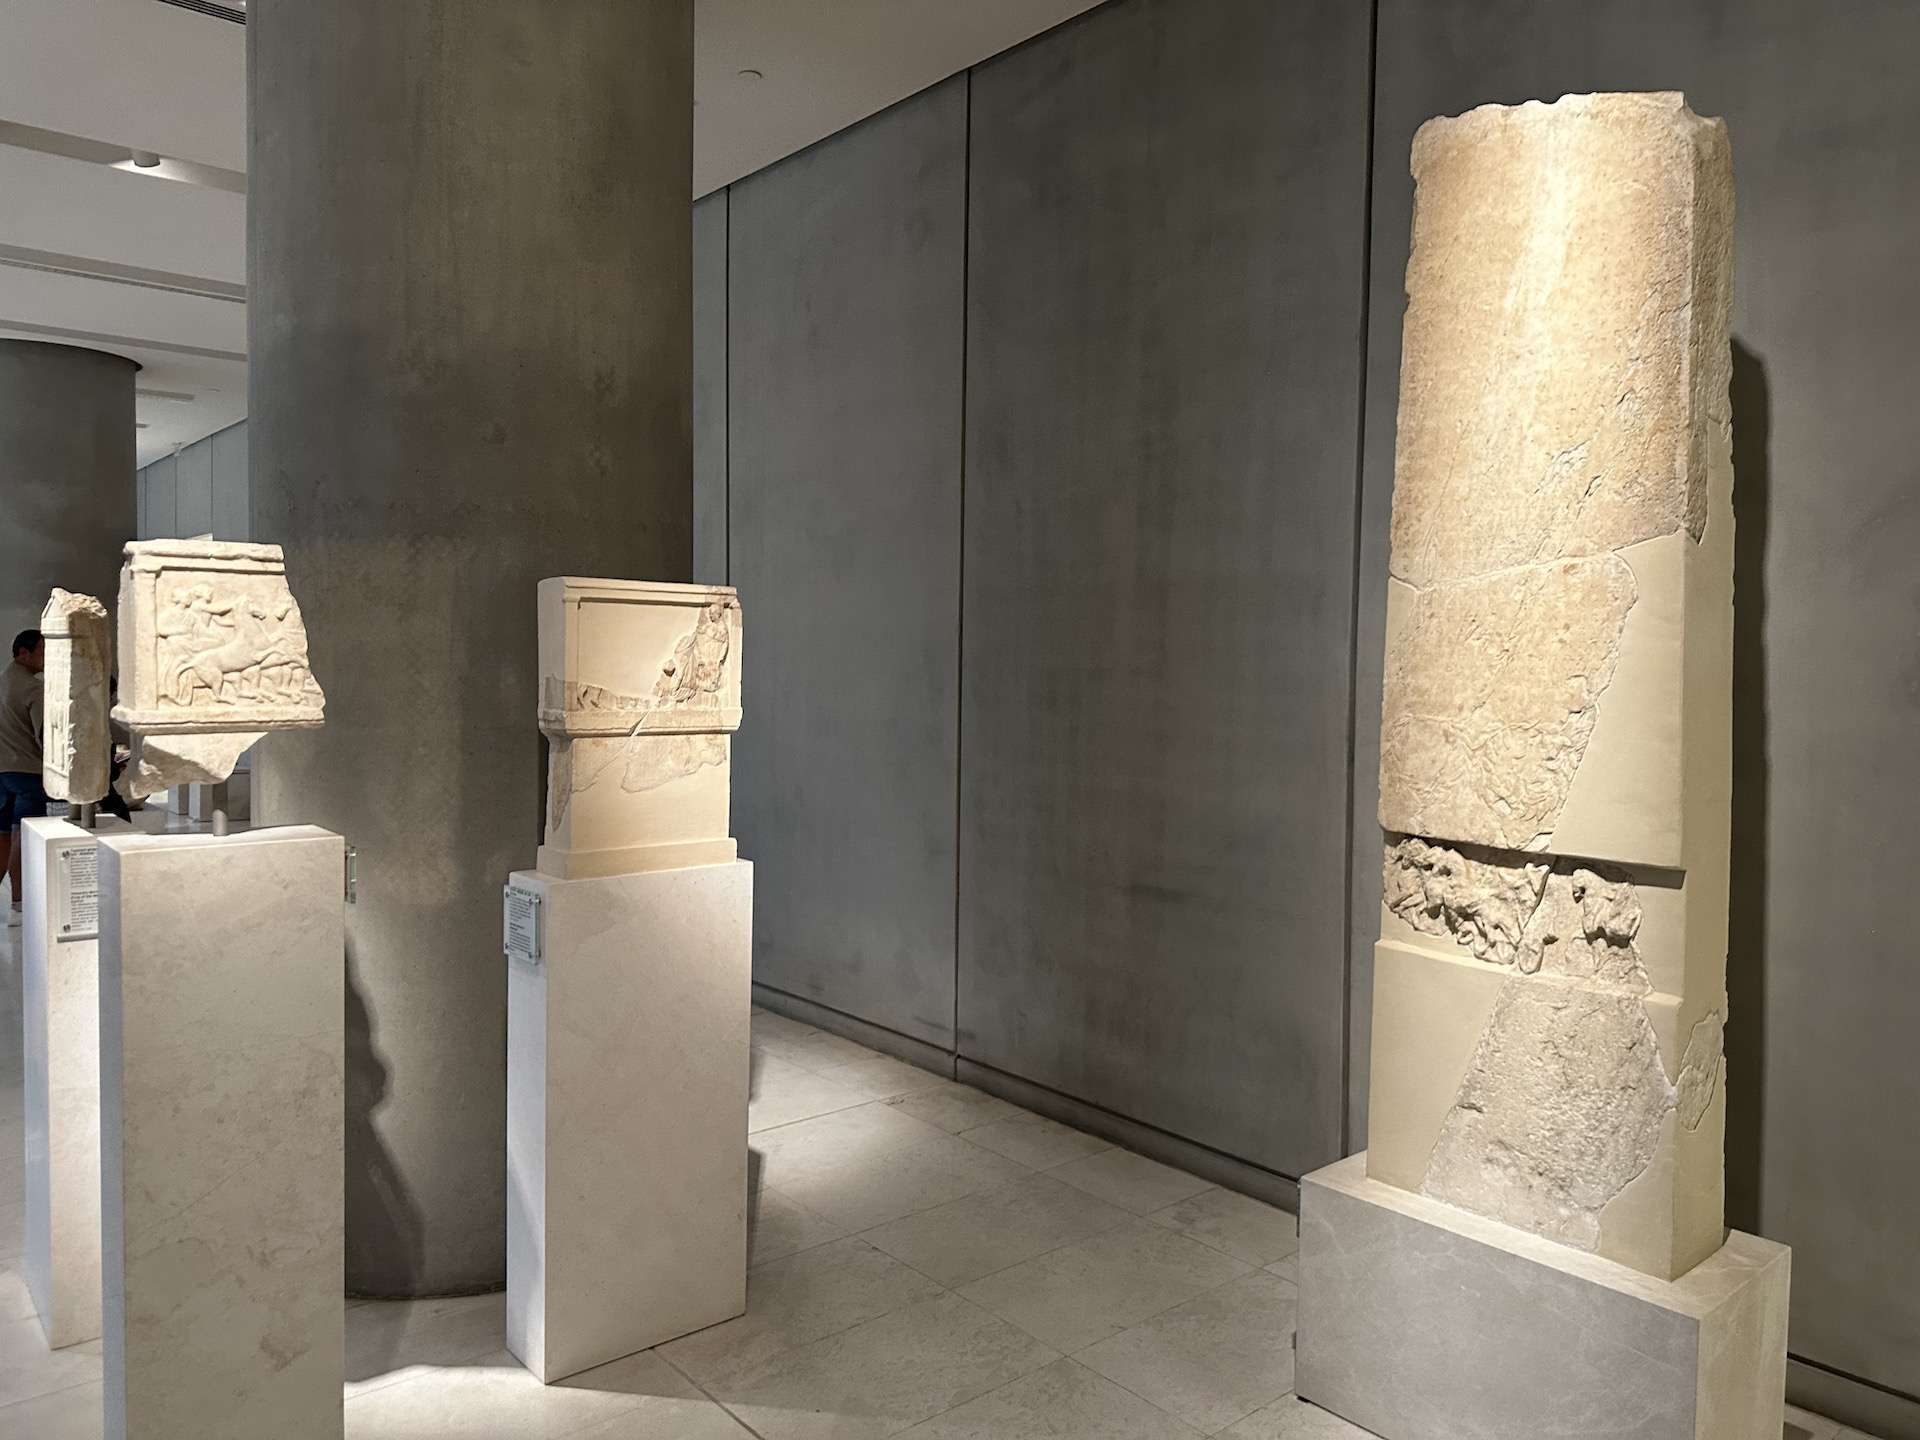 Honorary decrees at the Acropolis Museum in Athens, Greece